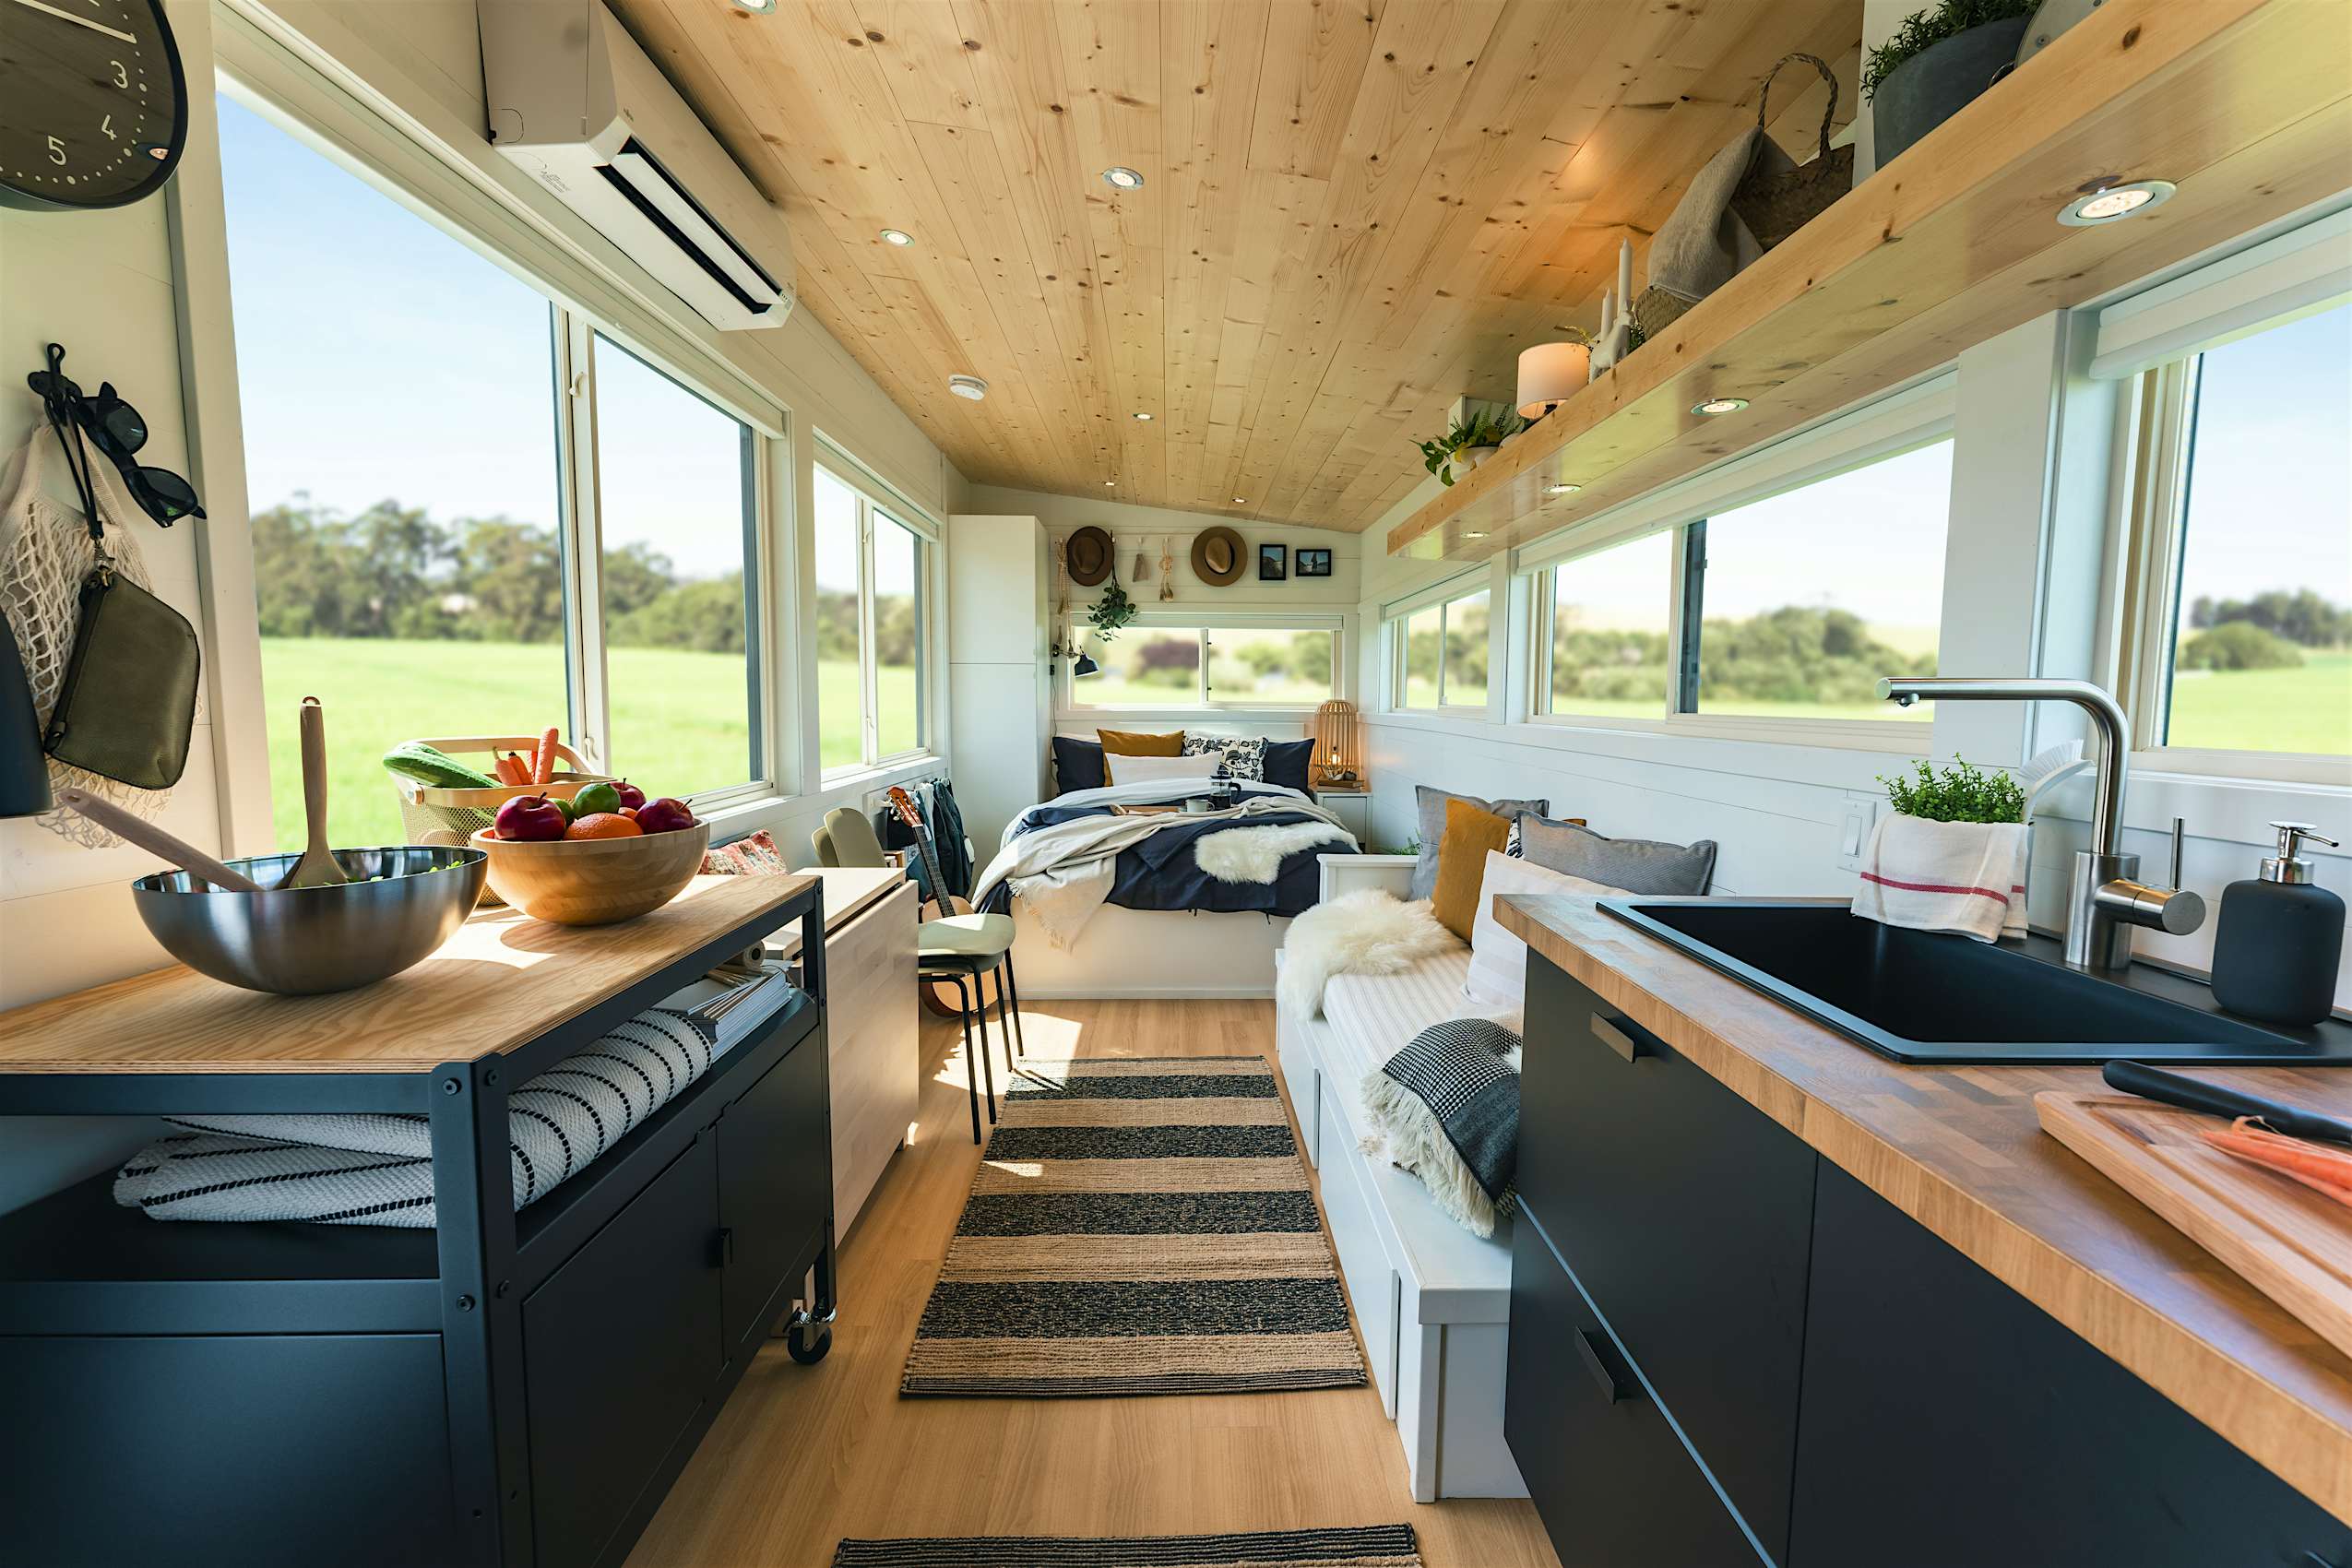 Take a peek inside Ikea's first sustainable tiny home - Lonely Planet